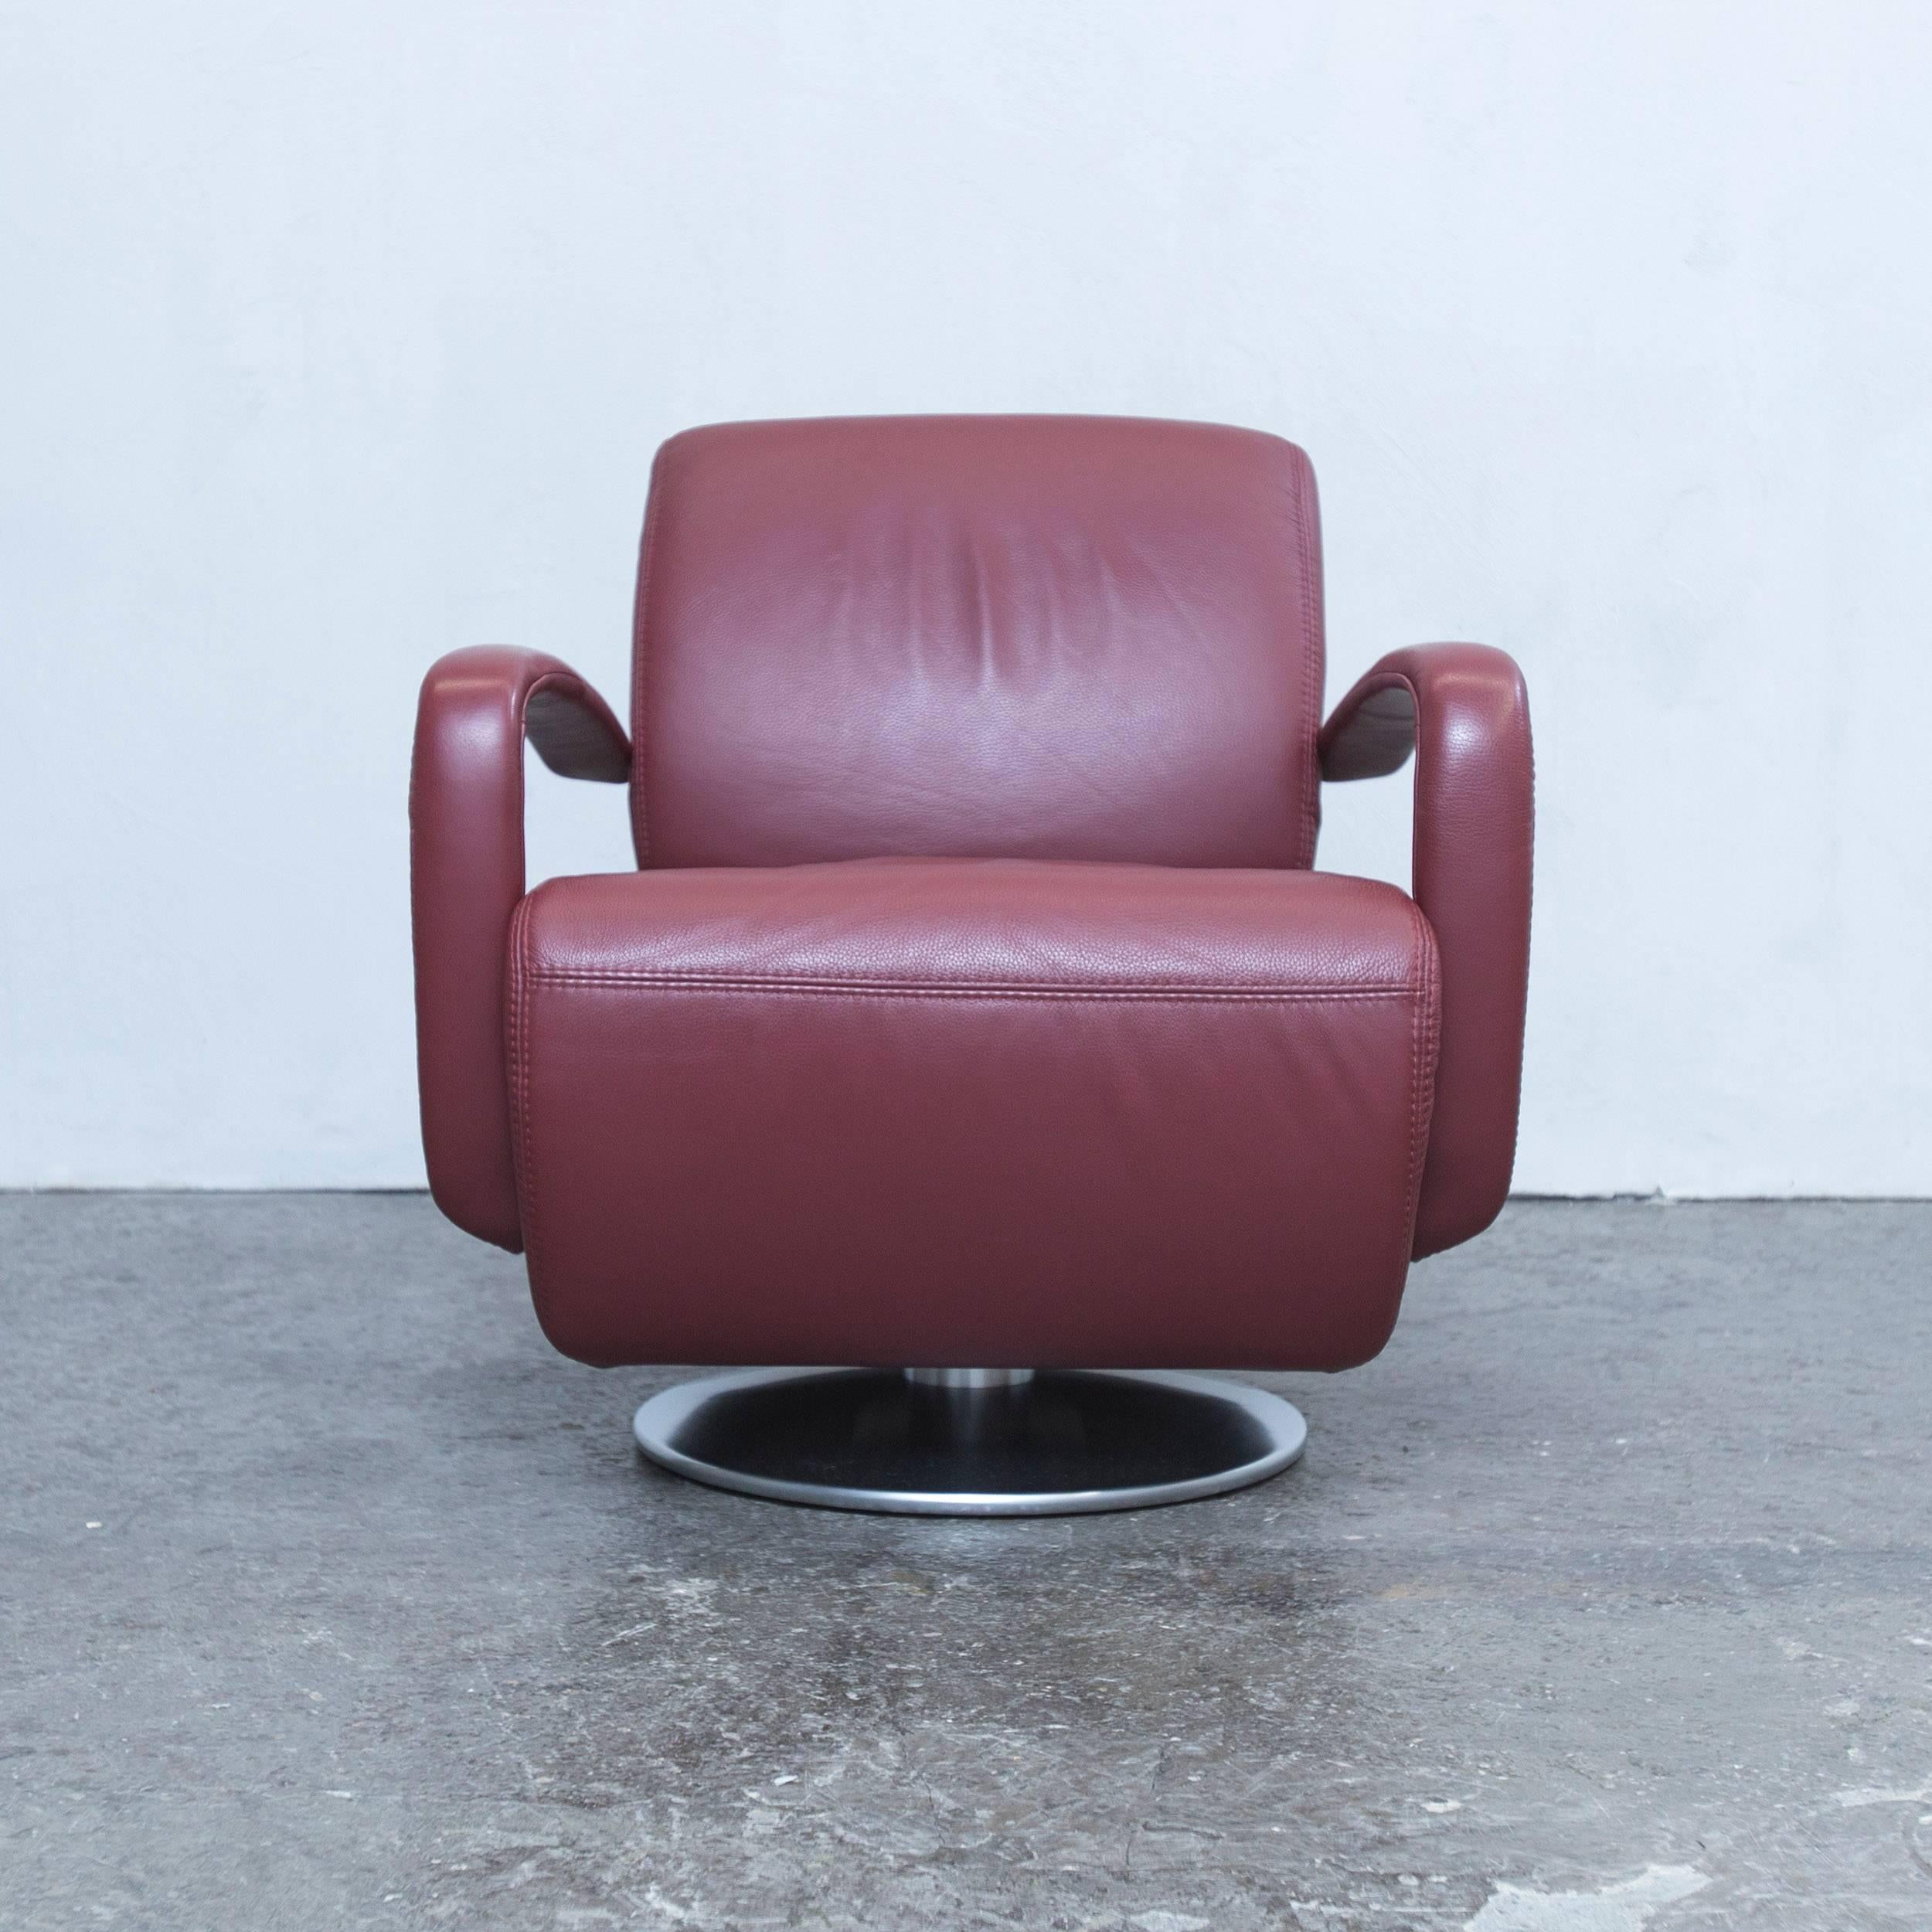 Red colored designer leather armchair in a modern and minimalistic style, designed for pure comfort and flexible placing.